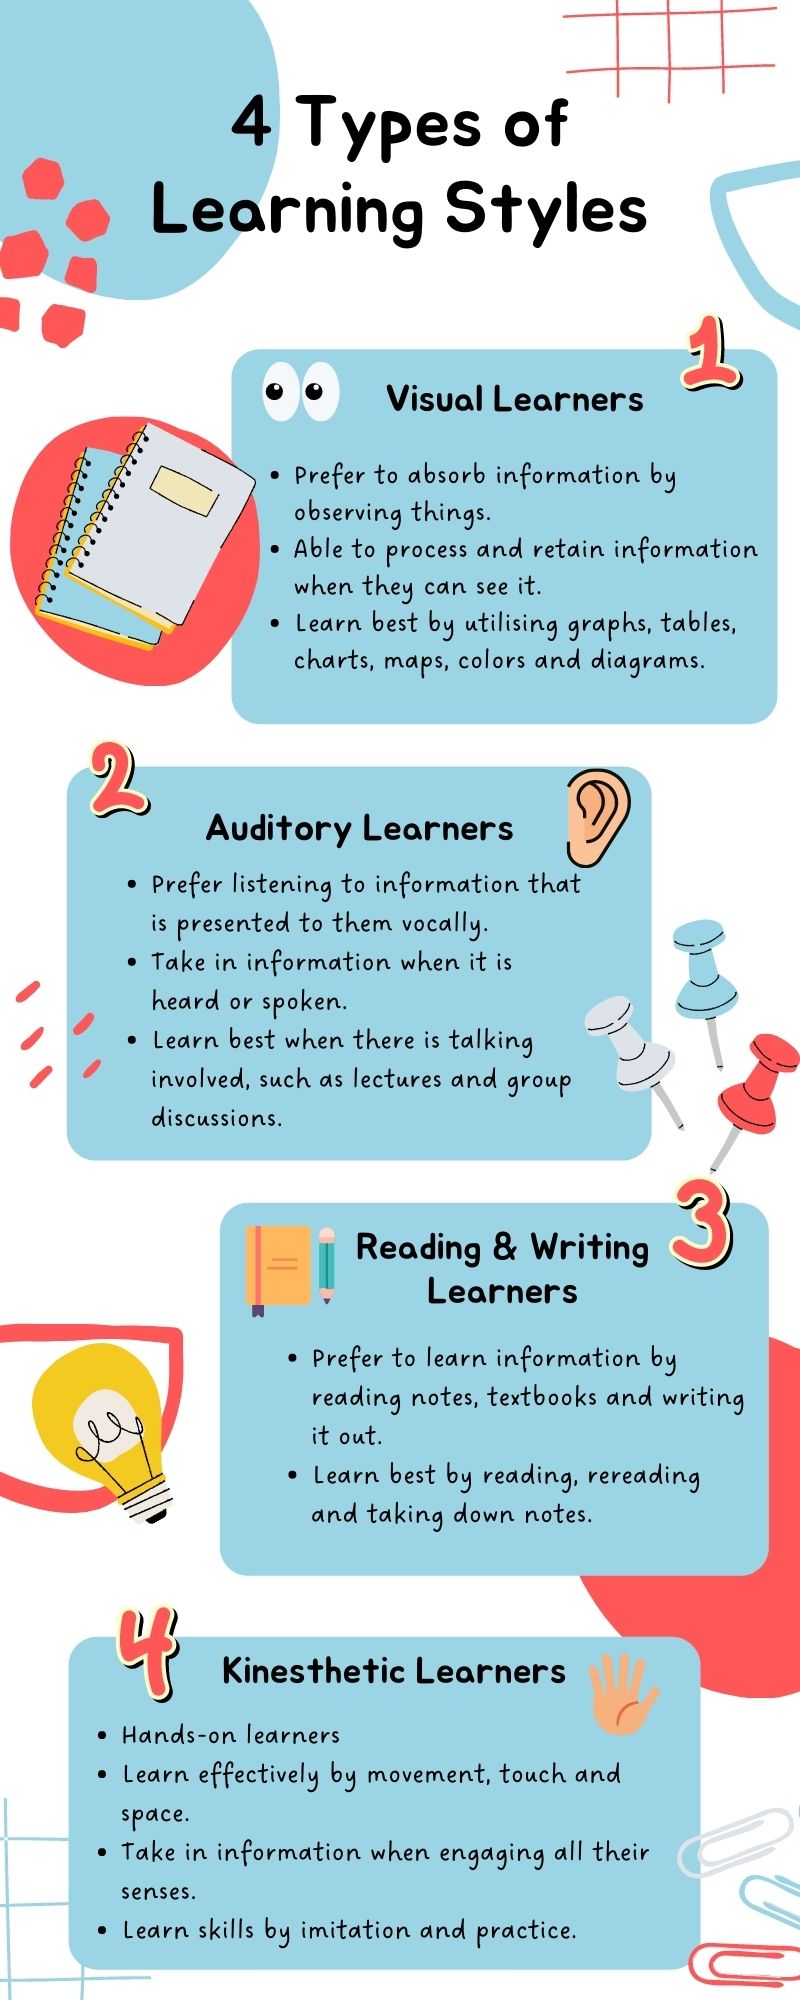 4 Types of Learners in Education